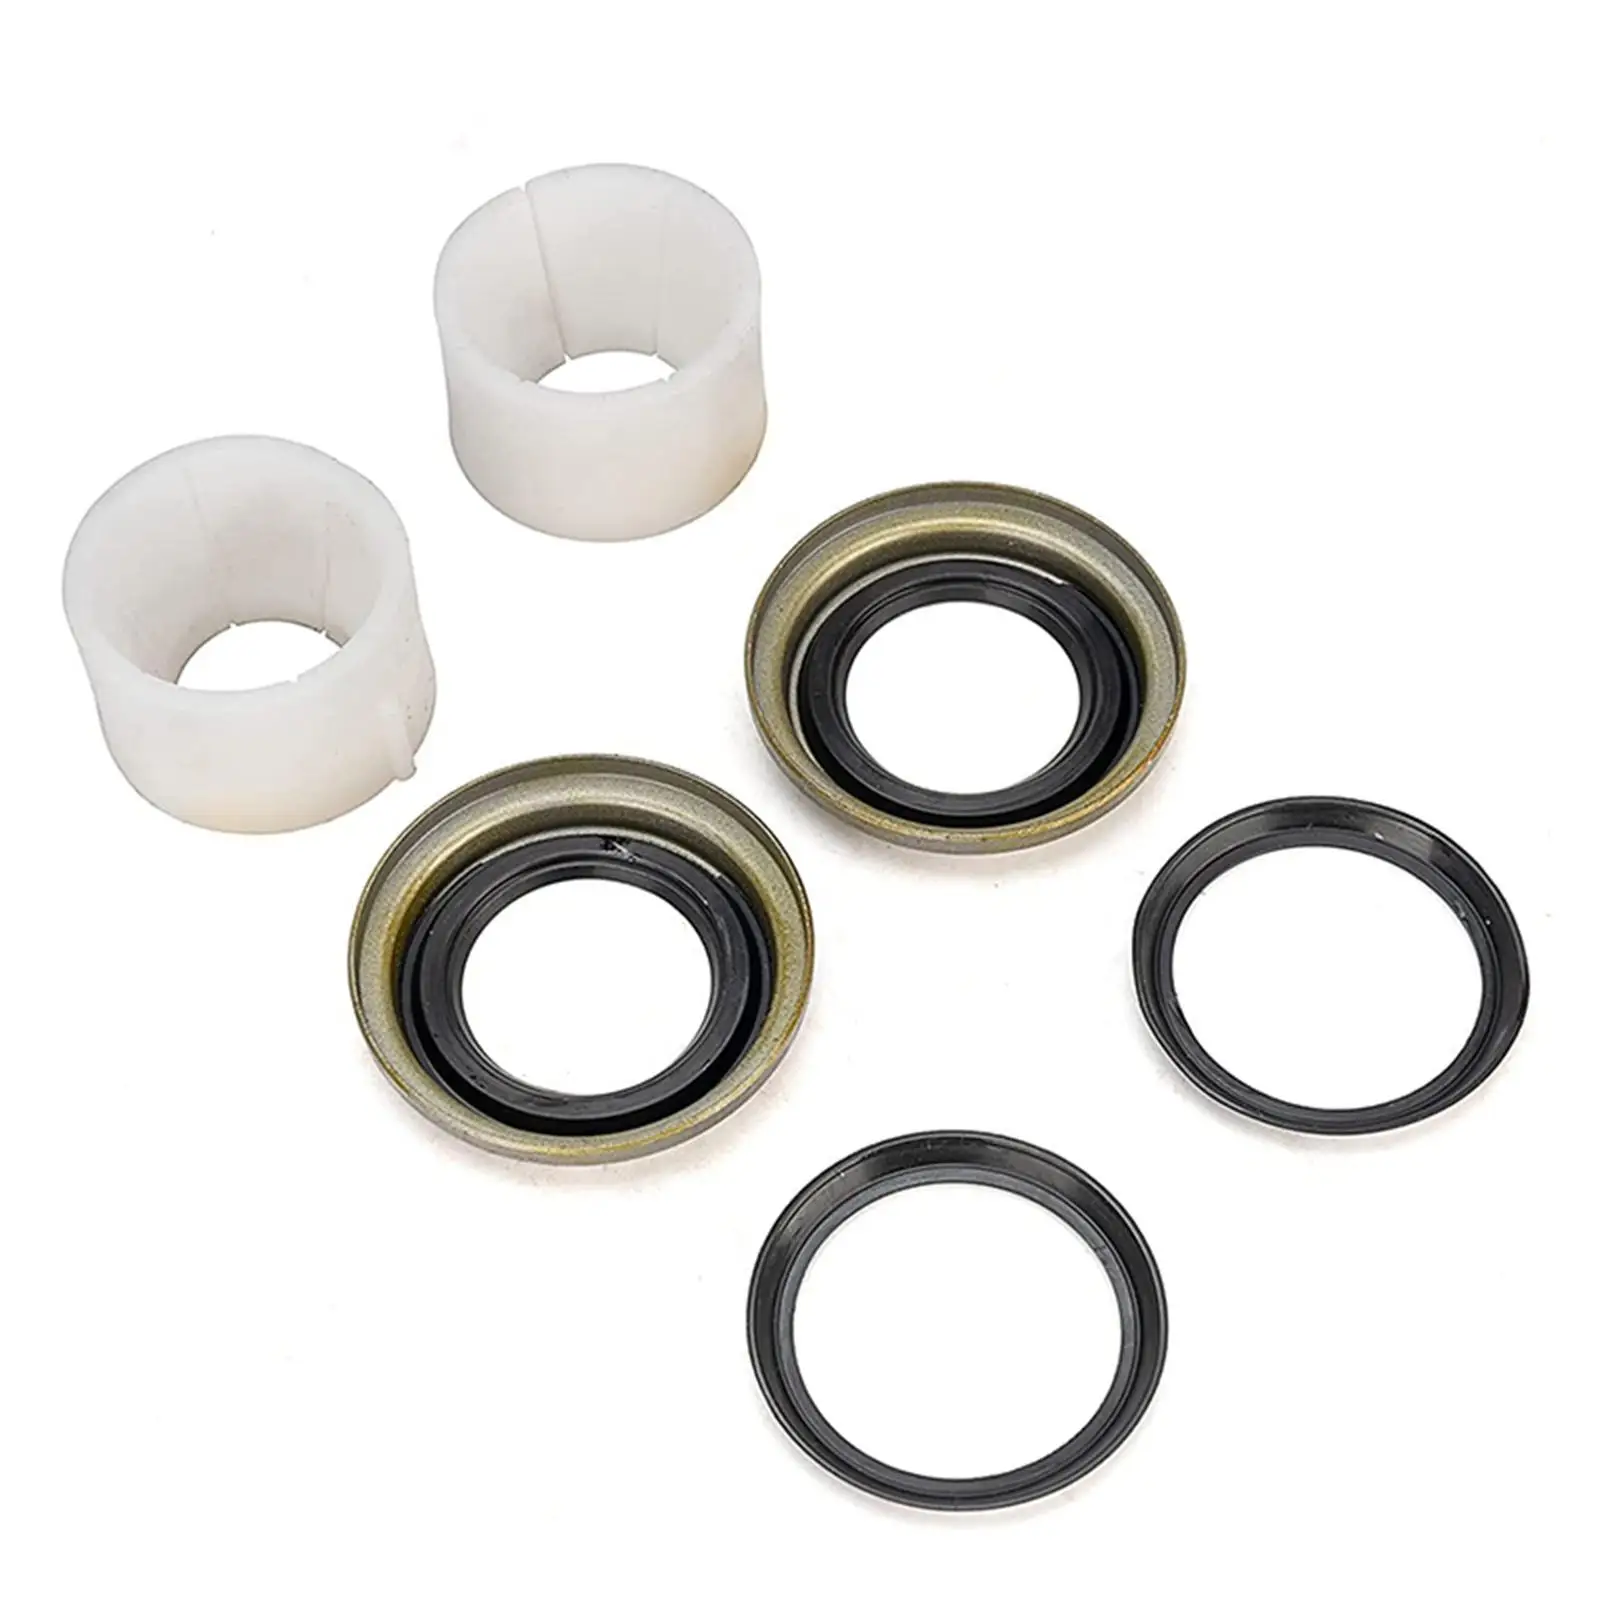 Kingpin Bearing Seal Rebuild Kit 706395x Directly Replace 37307 37300 41886 for Dodge Dana 60 Easy Installation Accessory